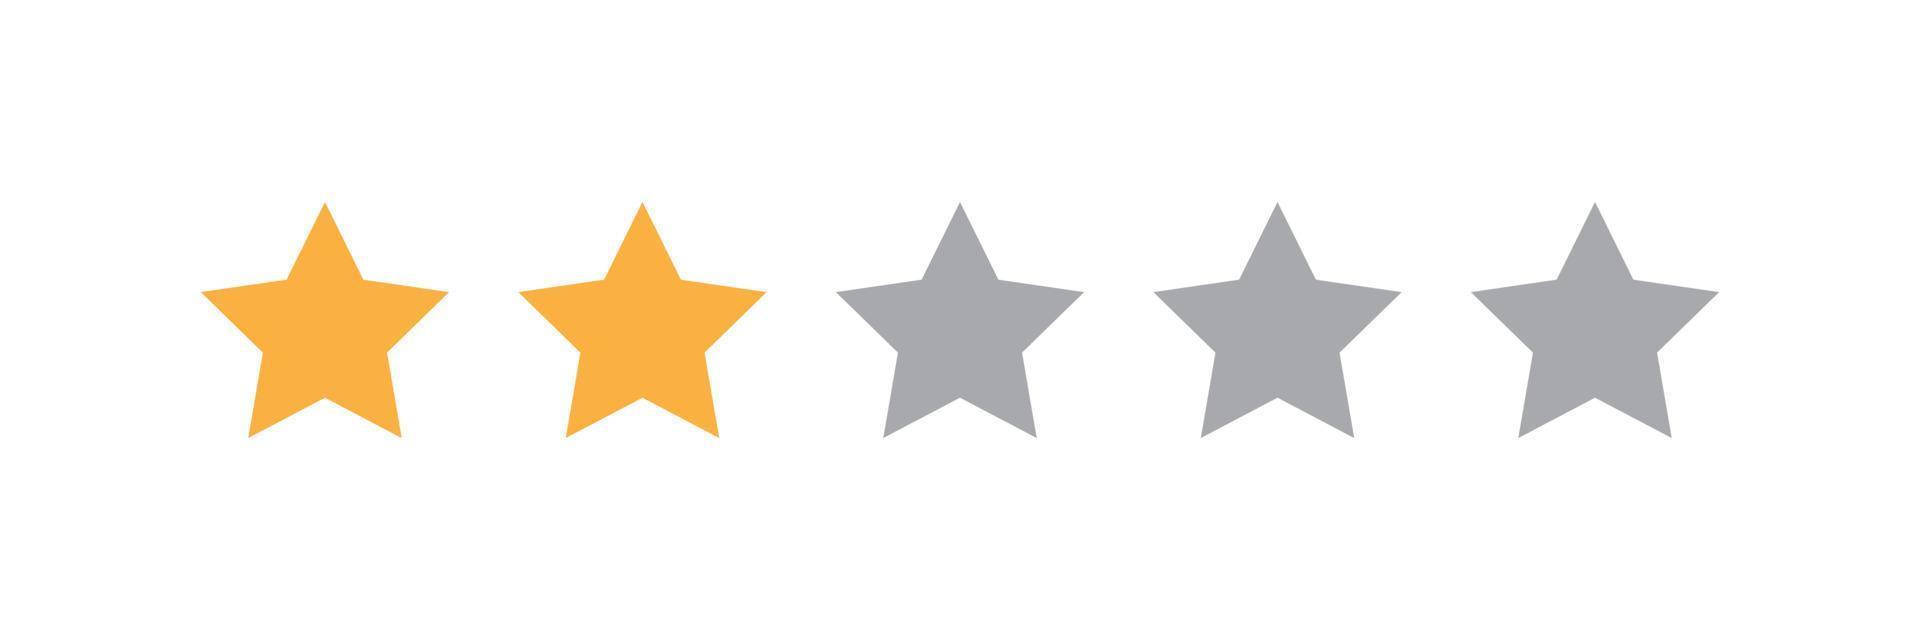 Two stars customer product rating review vector